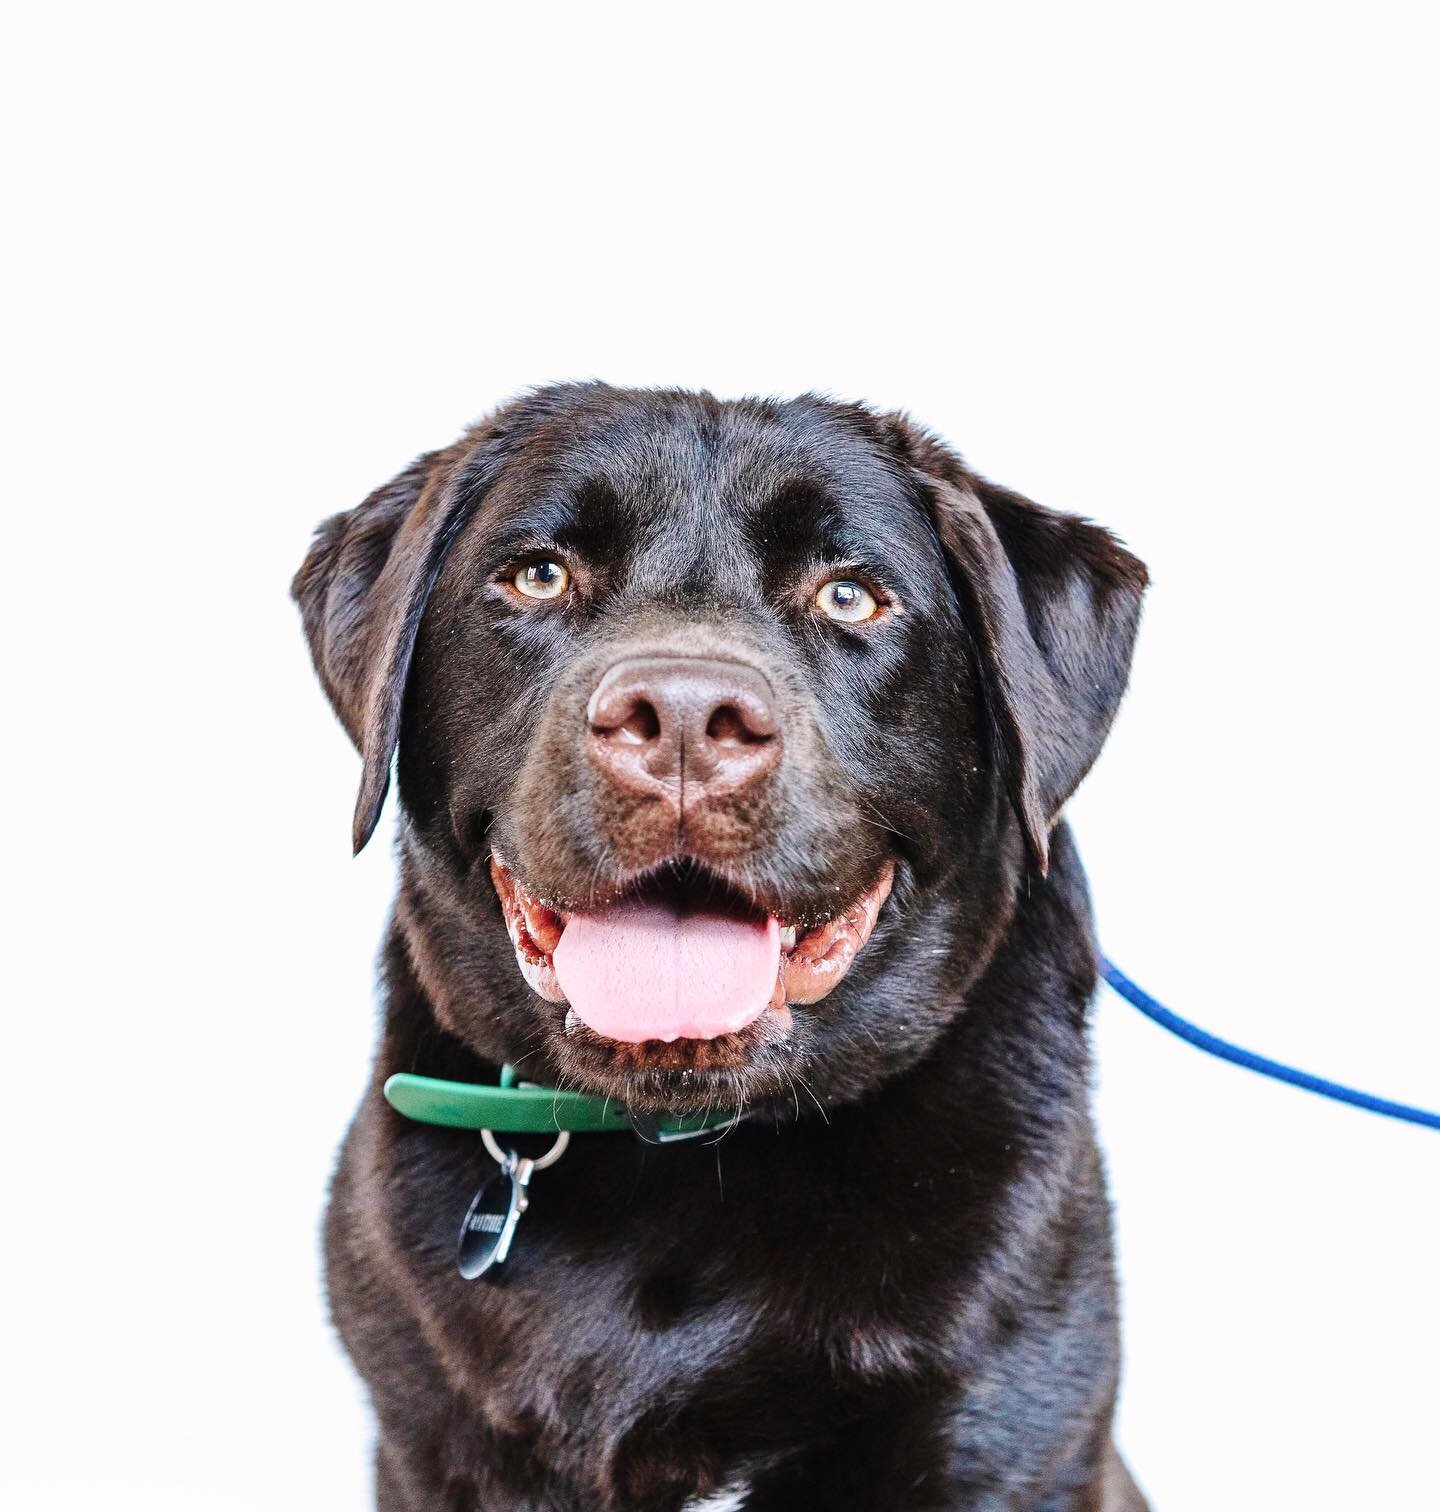 Ruthie &bull; 1yr &bull; Lab

Training goals: to be neutral in the presence of other dogs without needing to socialize, leash walking, e-collar conditioning, general obedience

Loves to: Play with her homies! This sweet girl could wrestle all day.

N